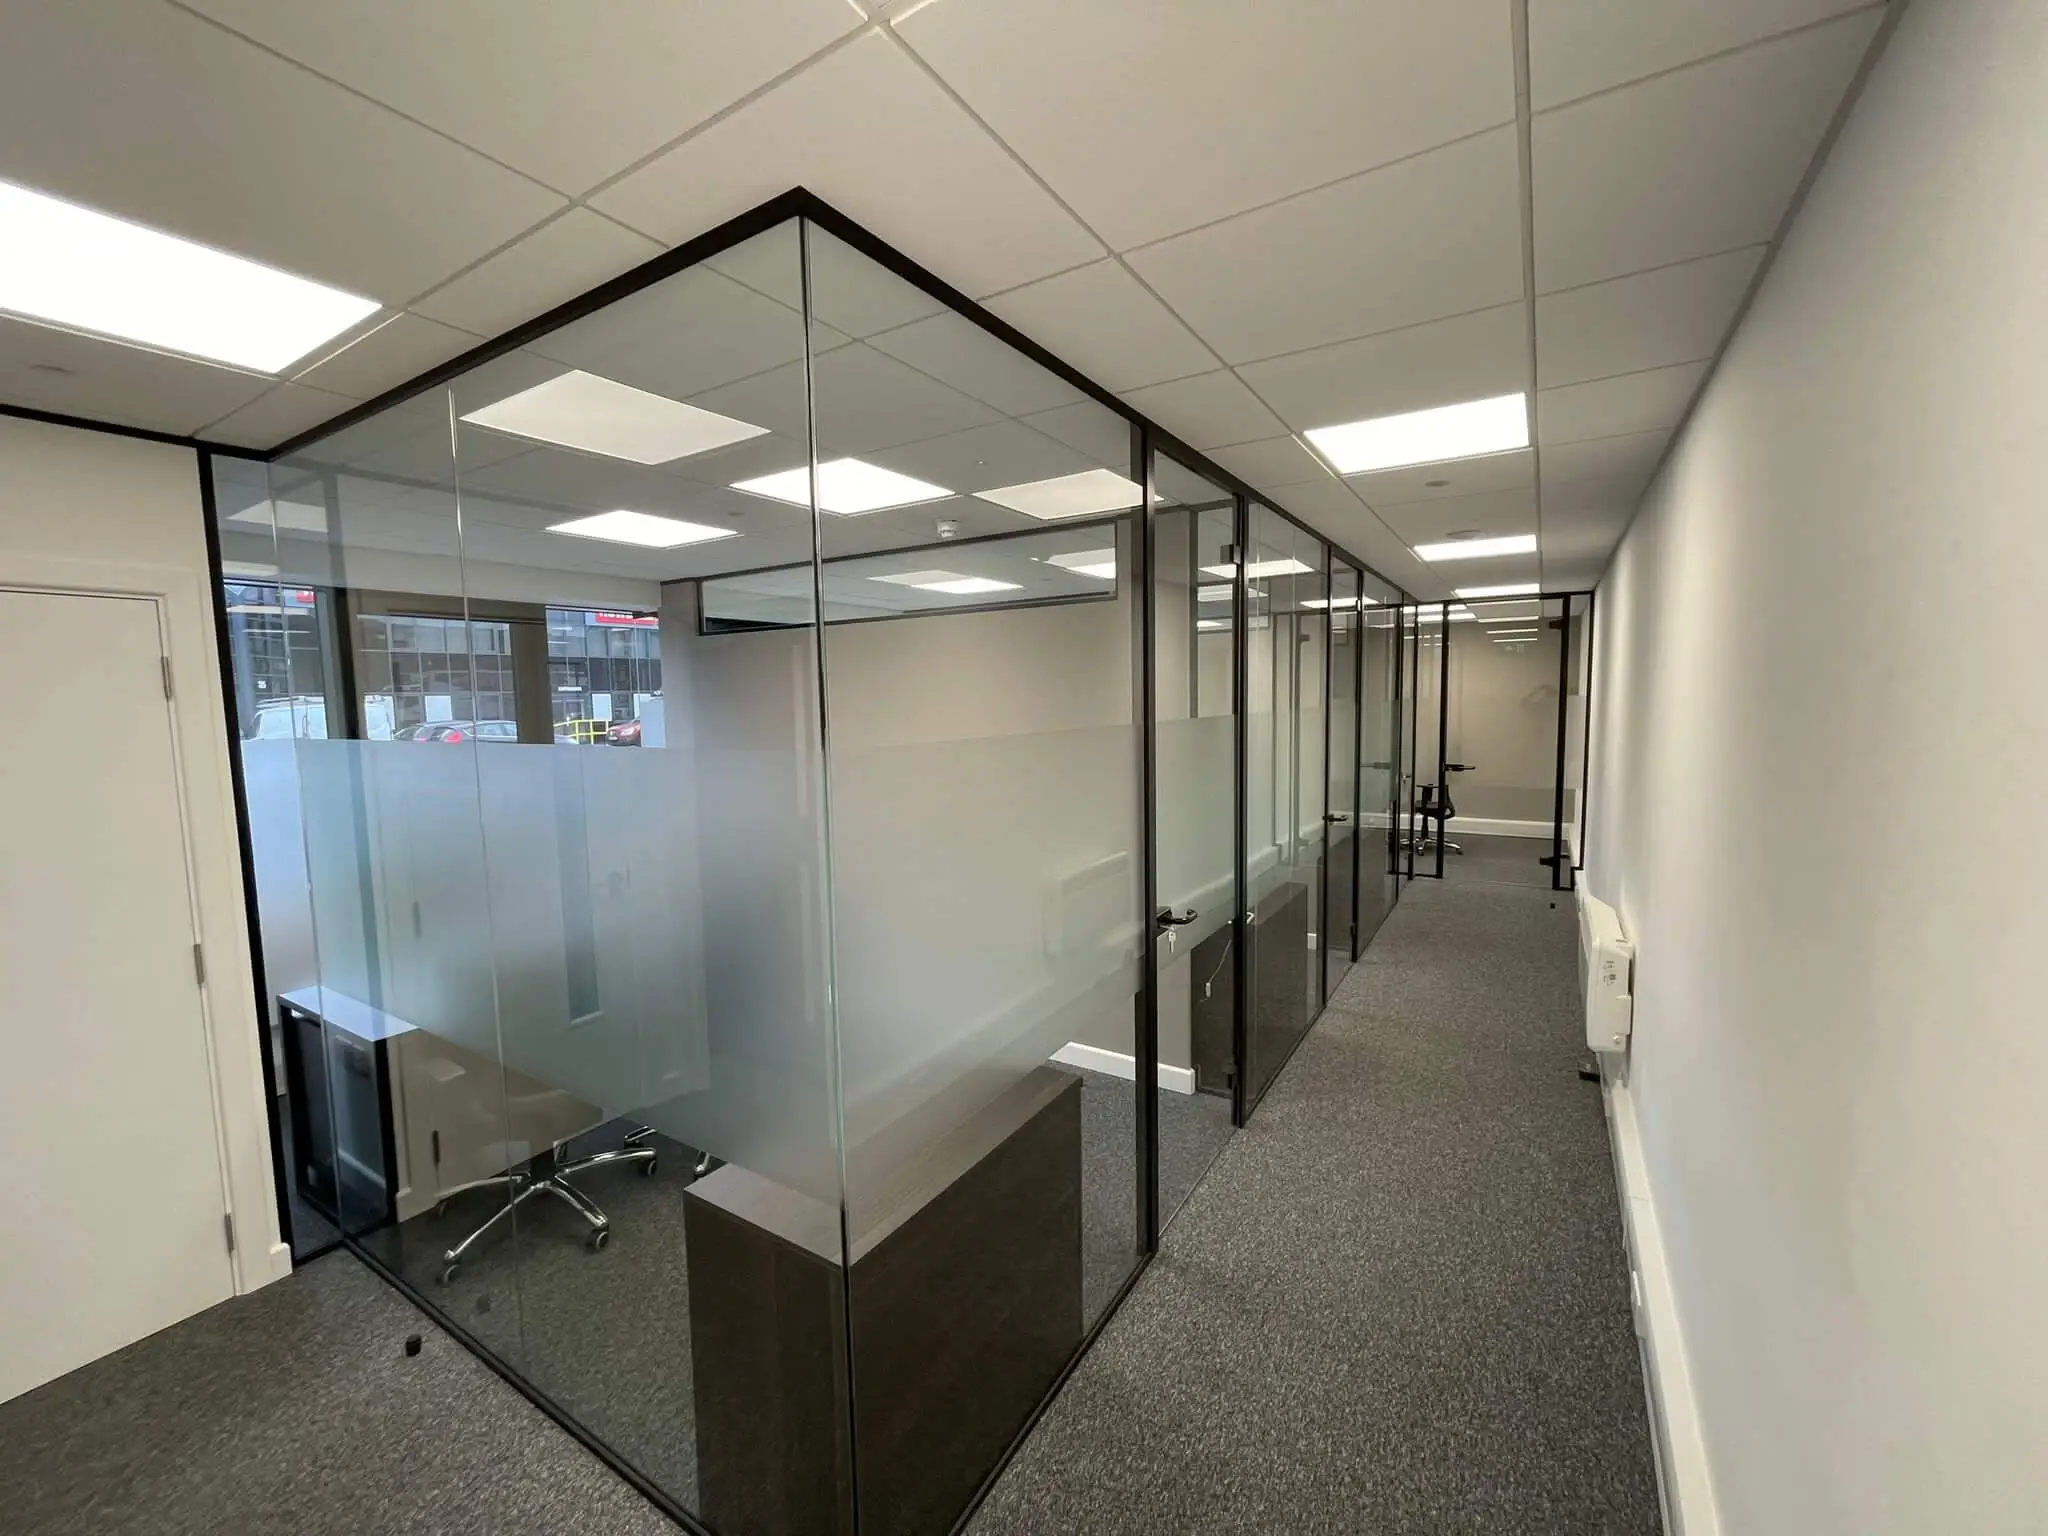 Office space divided with single glazed partiton with framed doors